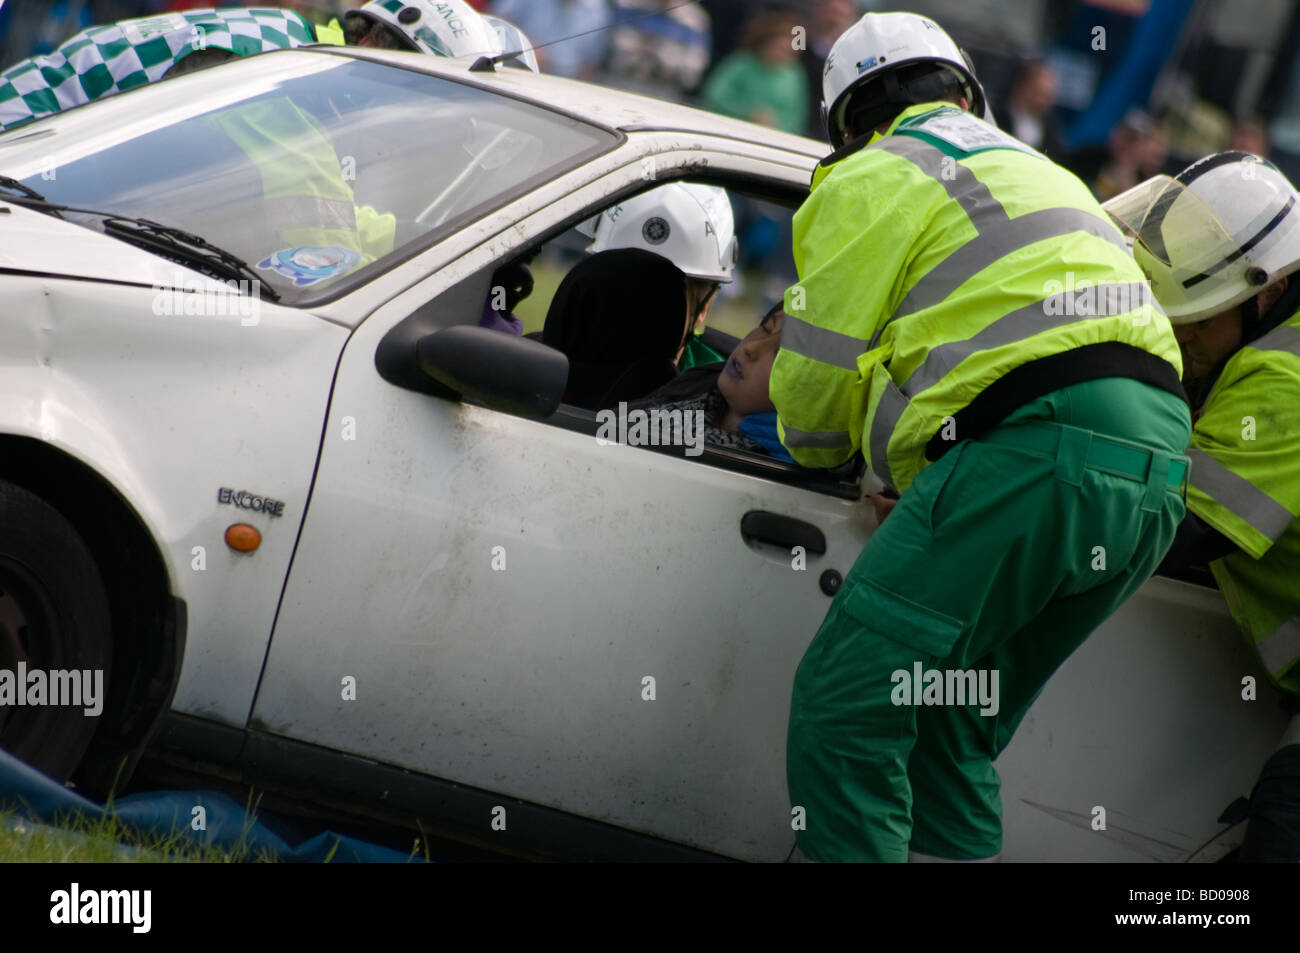 Ambulance crew attending a traffic accident, the girl in the front of the car is acting as this is a demonstration, Stock Photo